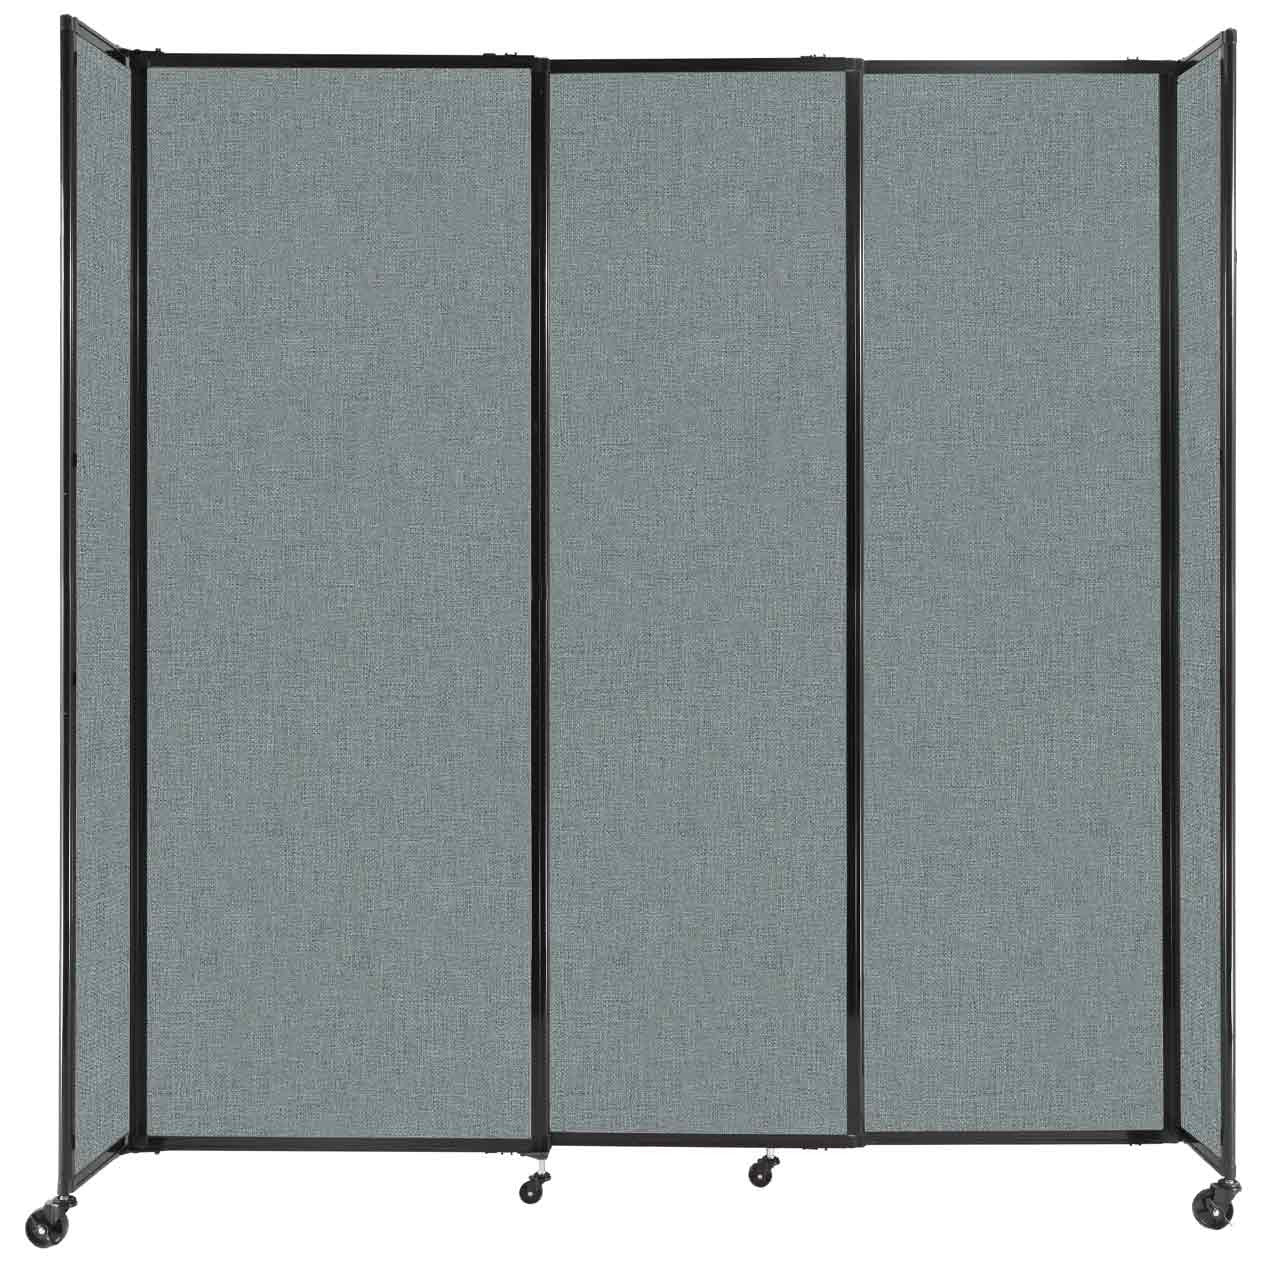 Room Divider Straight Wall Sliding Portable Partition Sound Absorbing Fabric